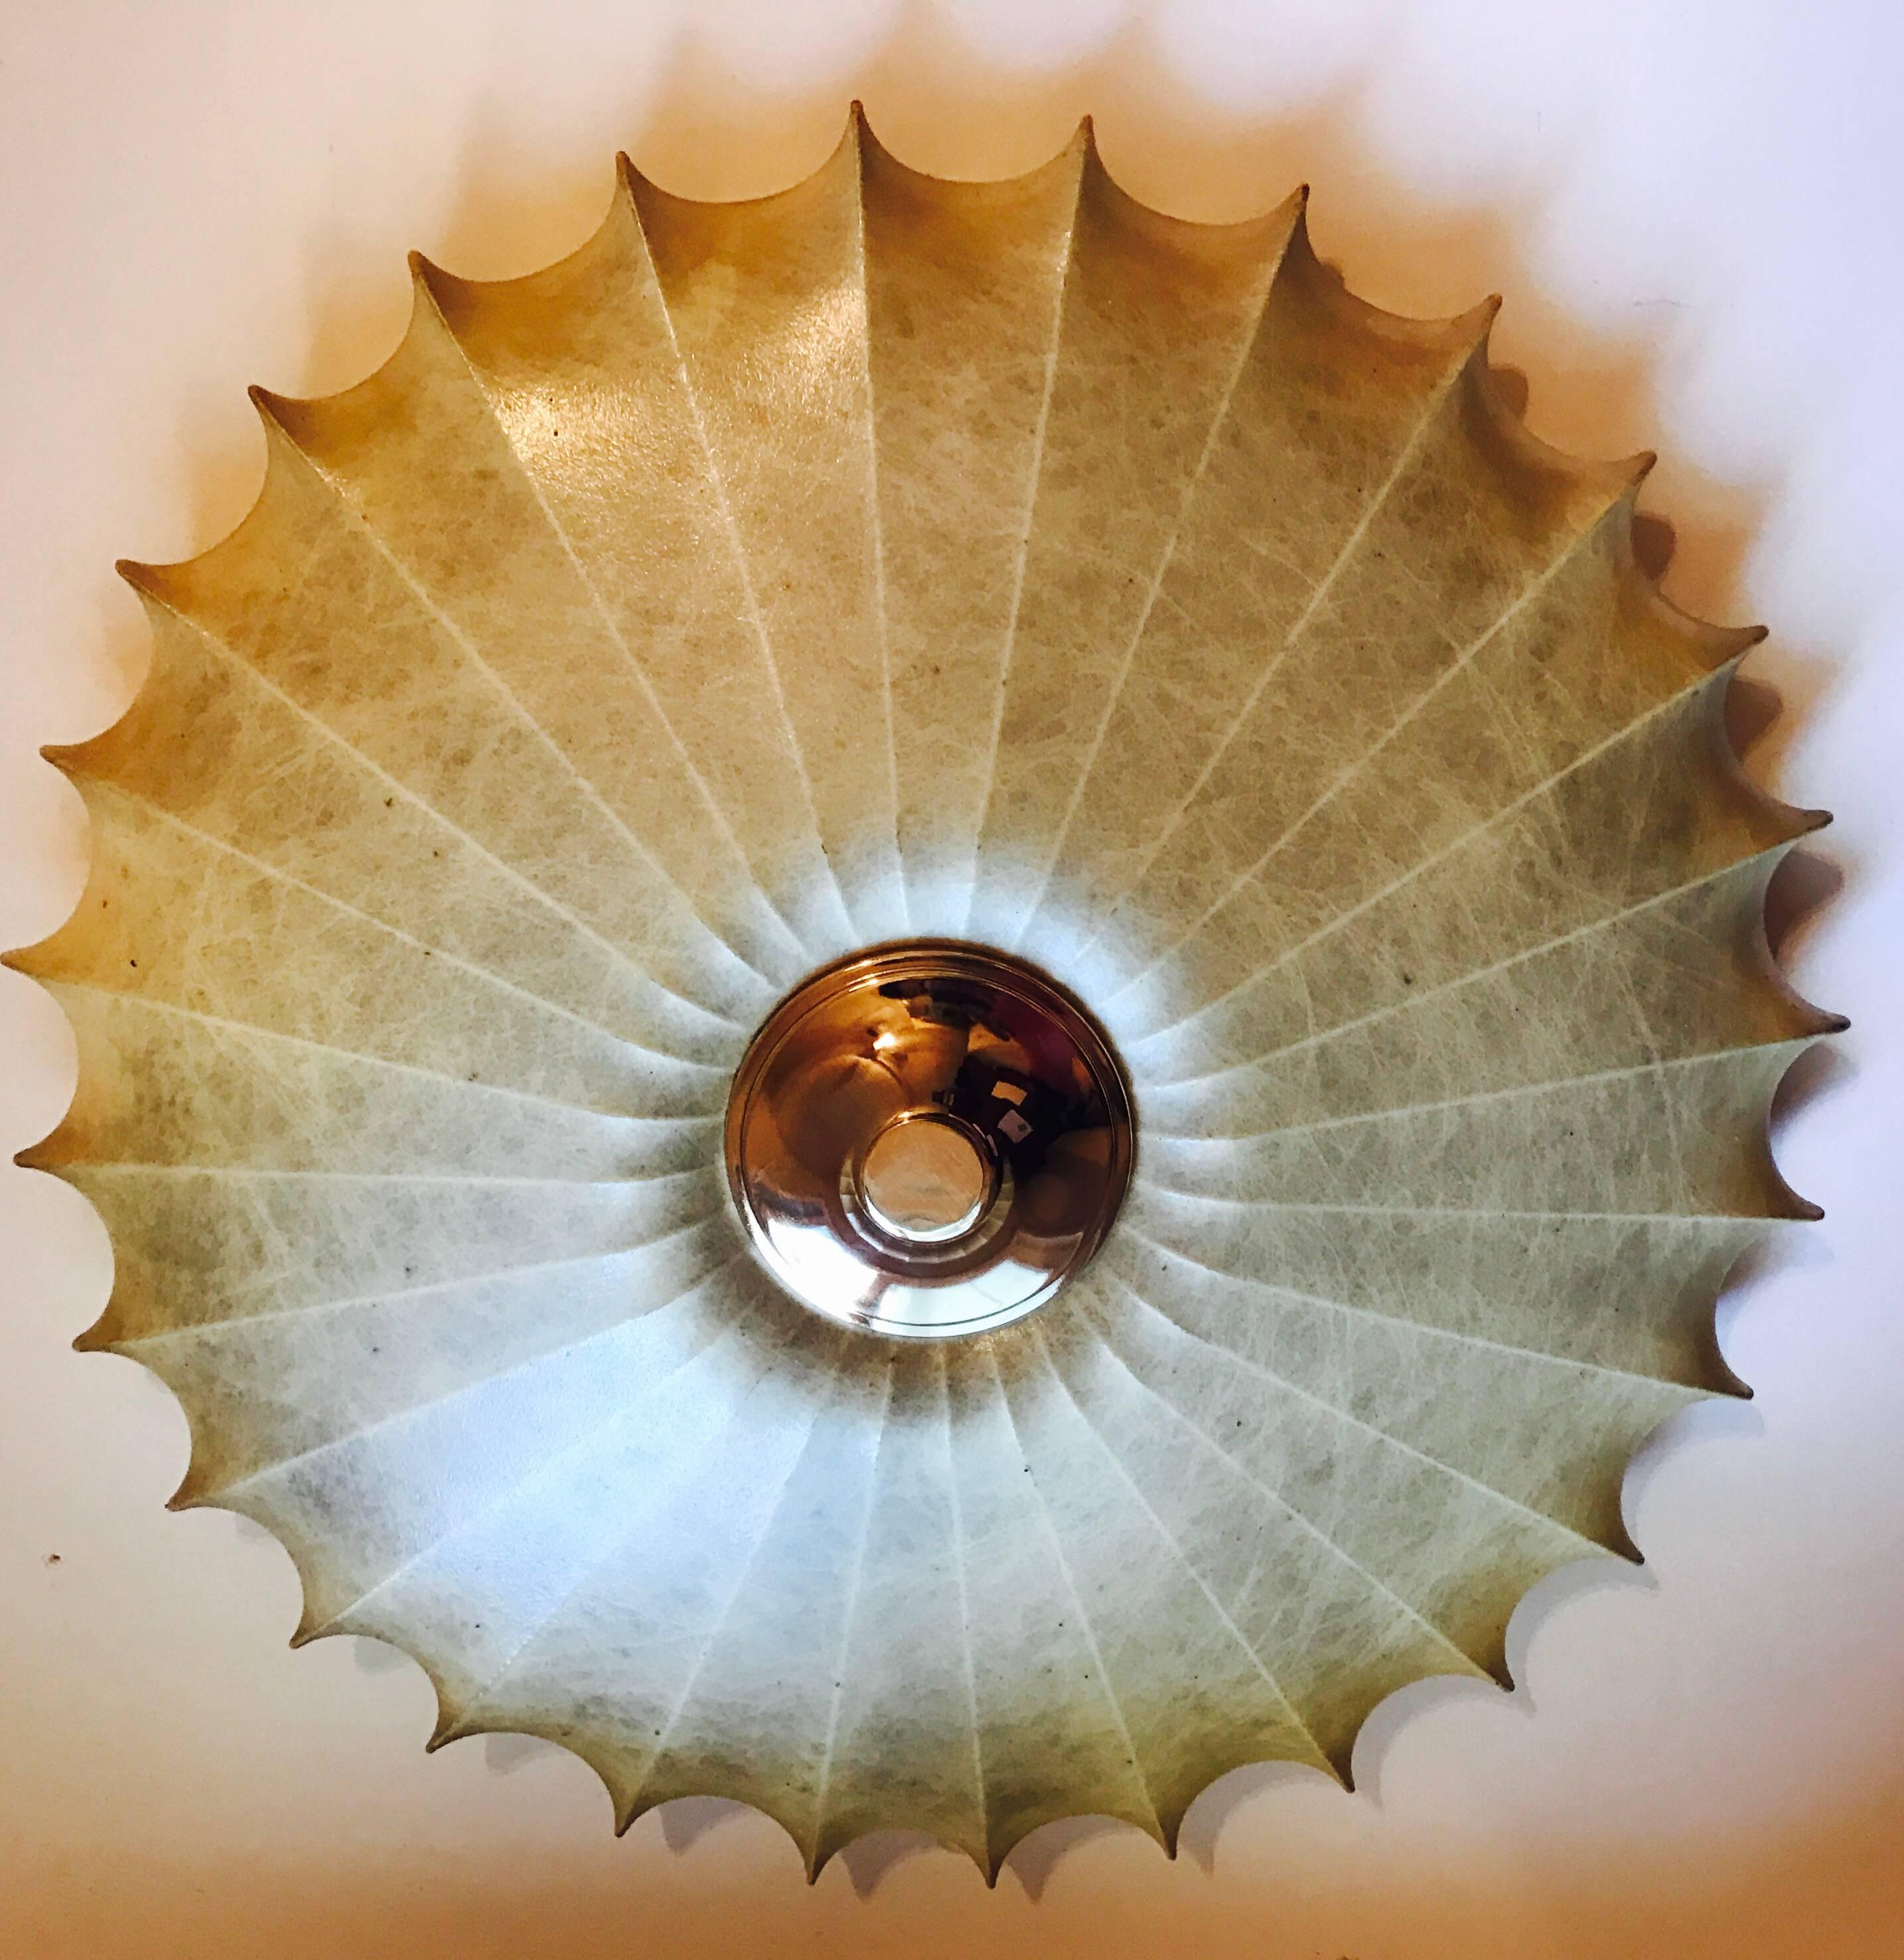 An original, 1960s Italian sculptural spun resin flush ceiling light with a polished brass firing designed by Achille Castiglioni for Flos. Four-light sources. Newly Rewired.